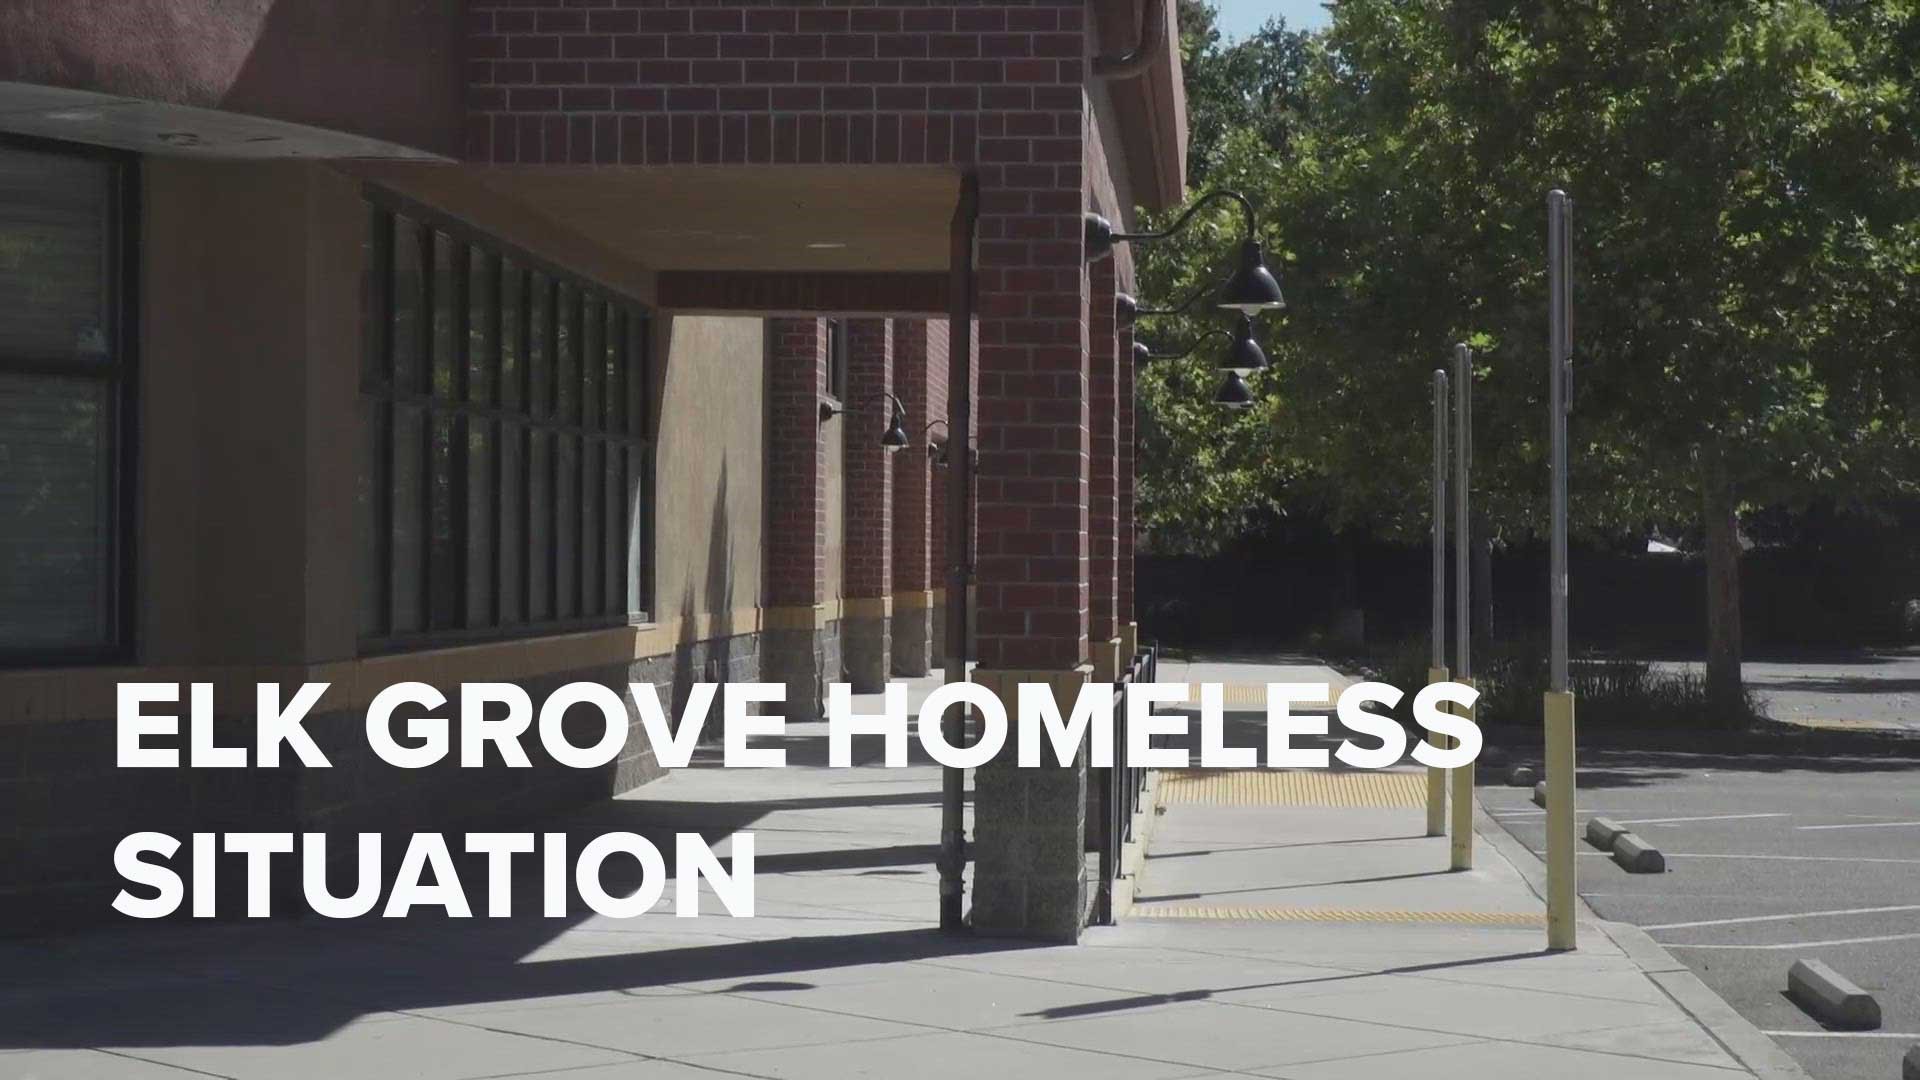 City of Elk Grove to decide on converting former pharmacy into a temporary shelter for homelessness